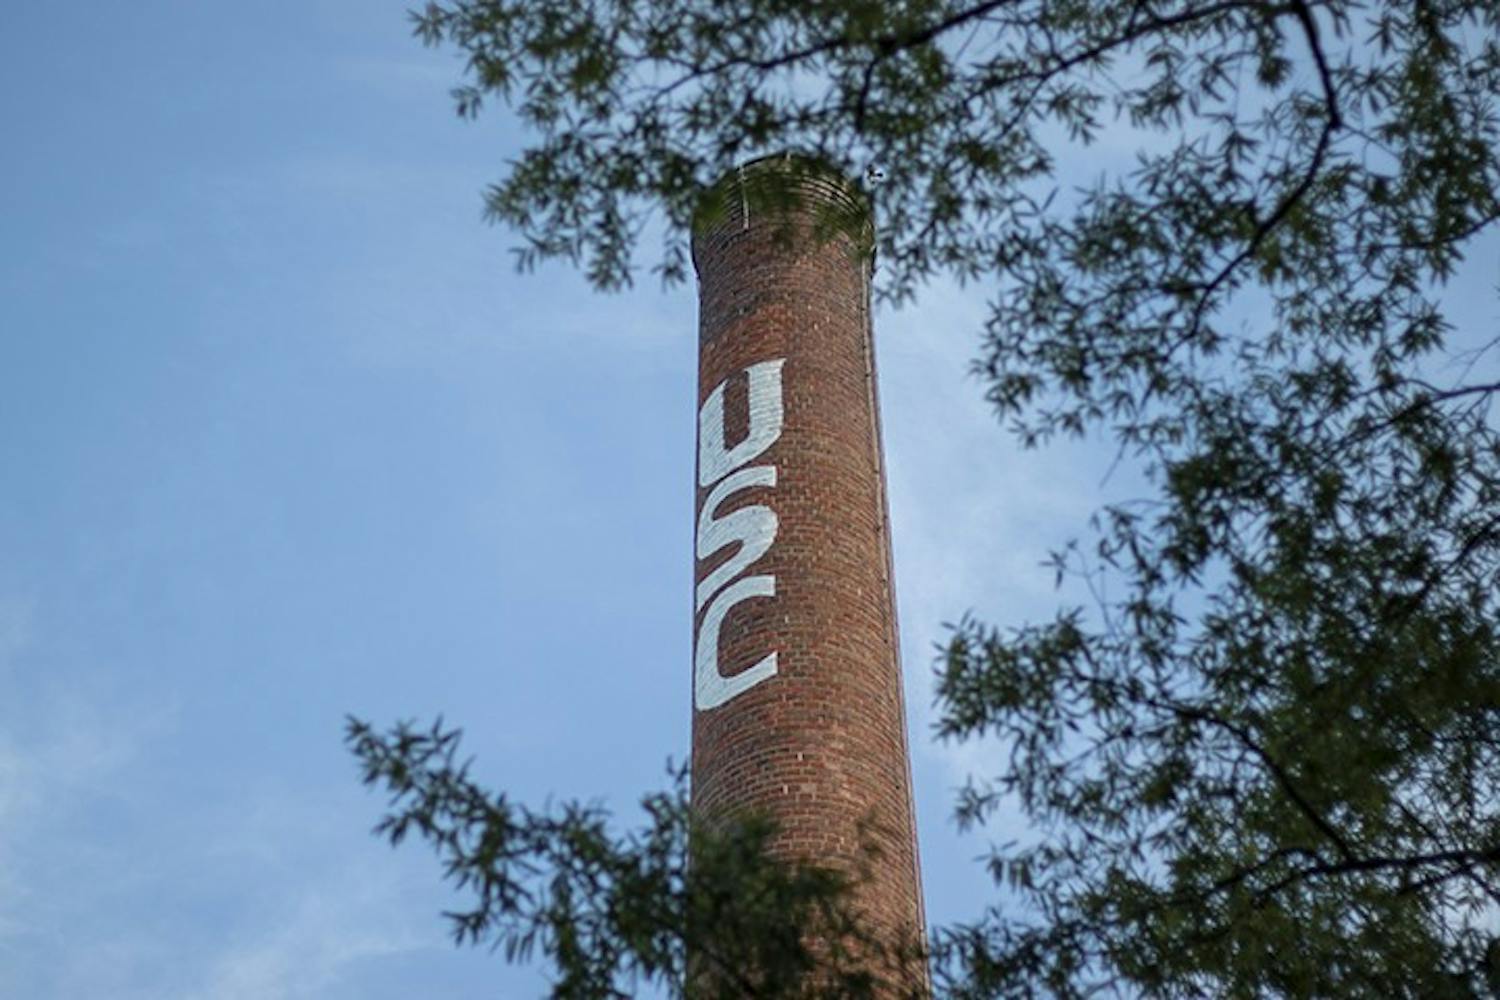 The 鶹С򽴫ý smokestack located next to the Horseshoe is a notable landmark on the university’s campus.